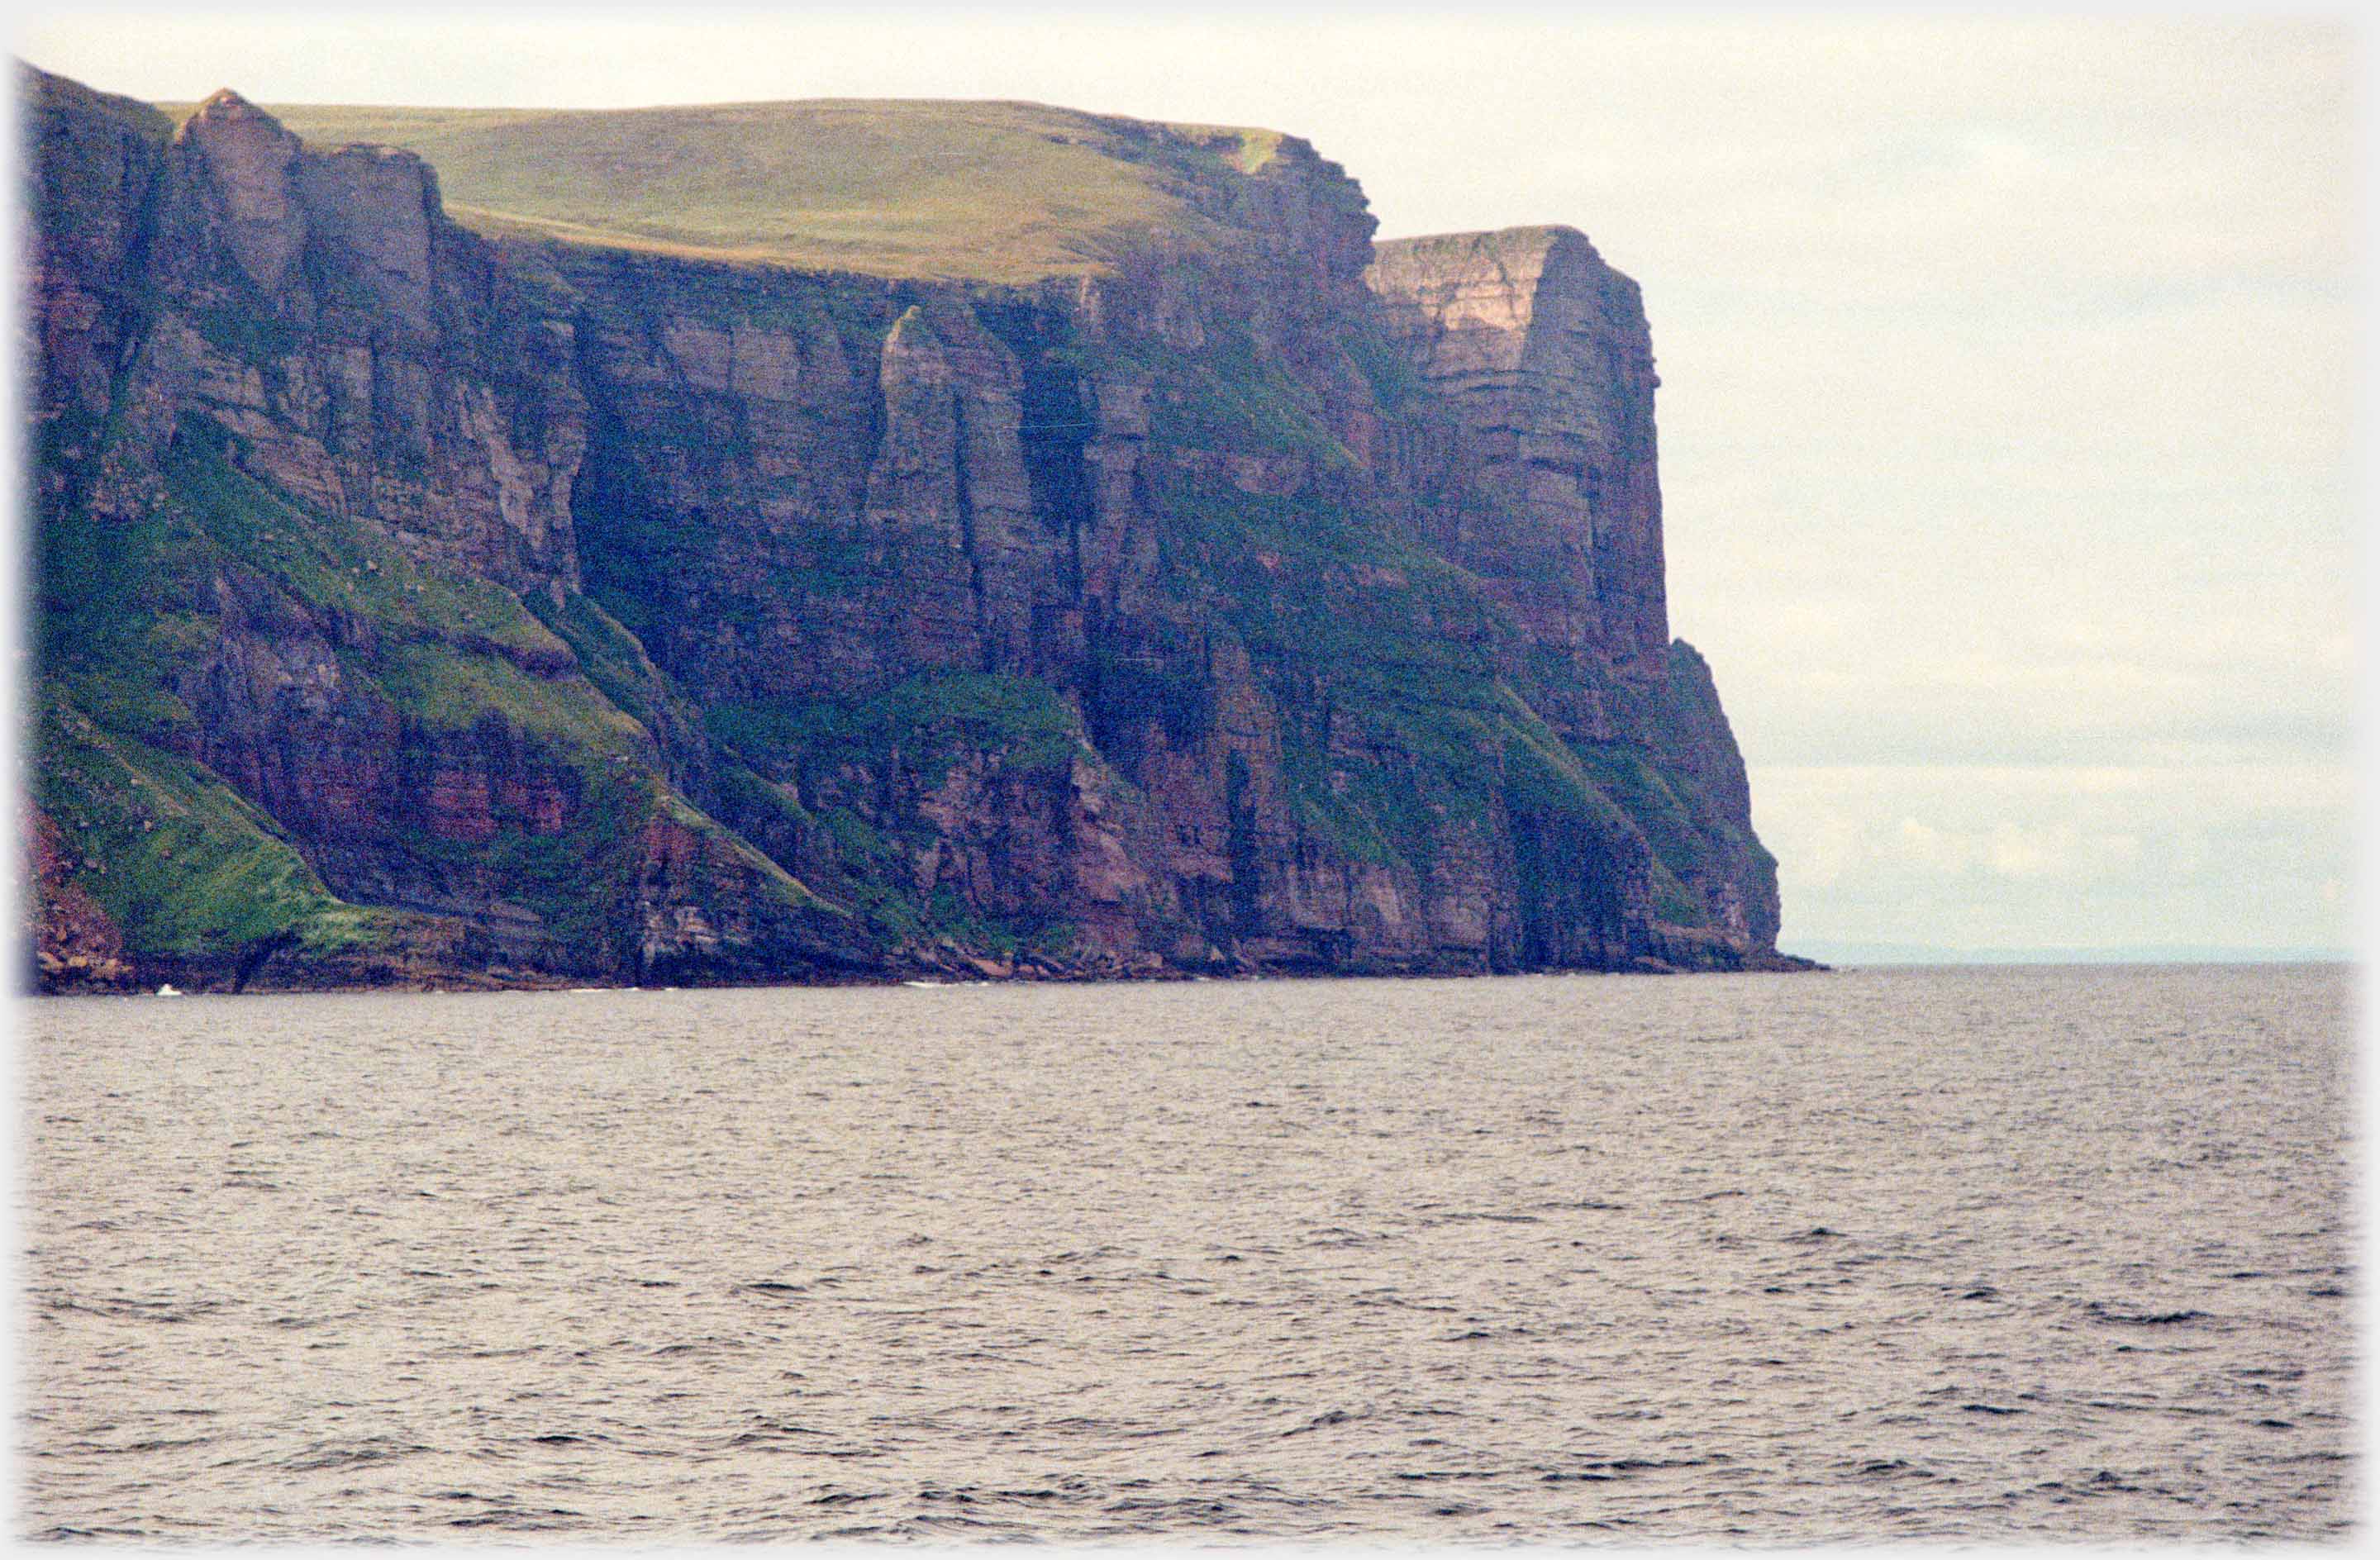 Passing the cliffs which are seen rising impressively ahead.